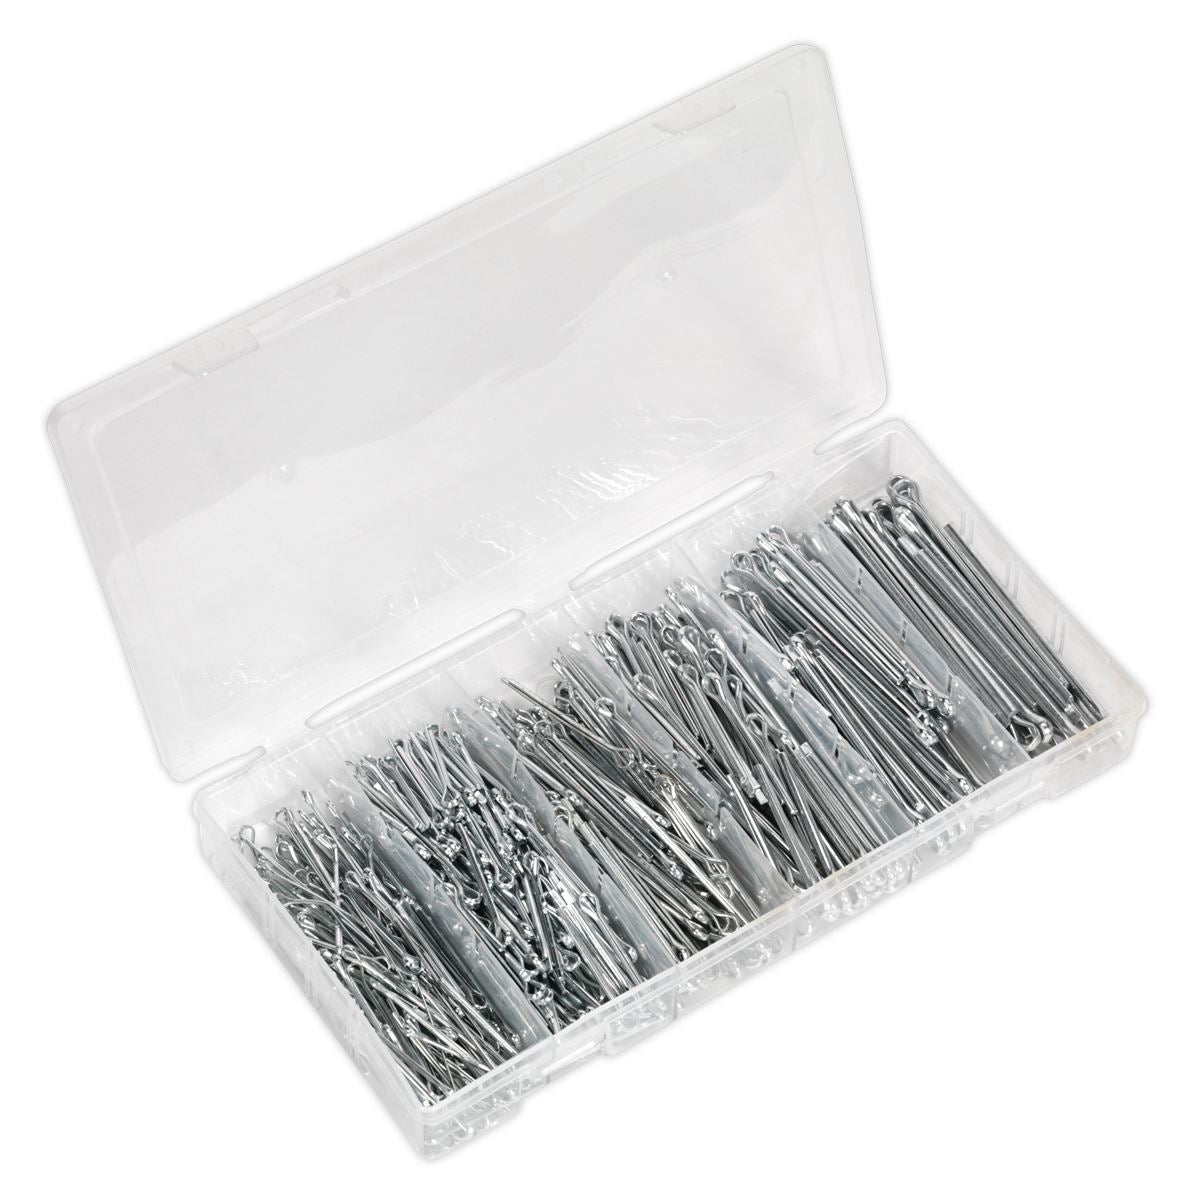 Sealey Split Pin Assortment 555pc Small Sizes Metric & Imperial